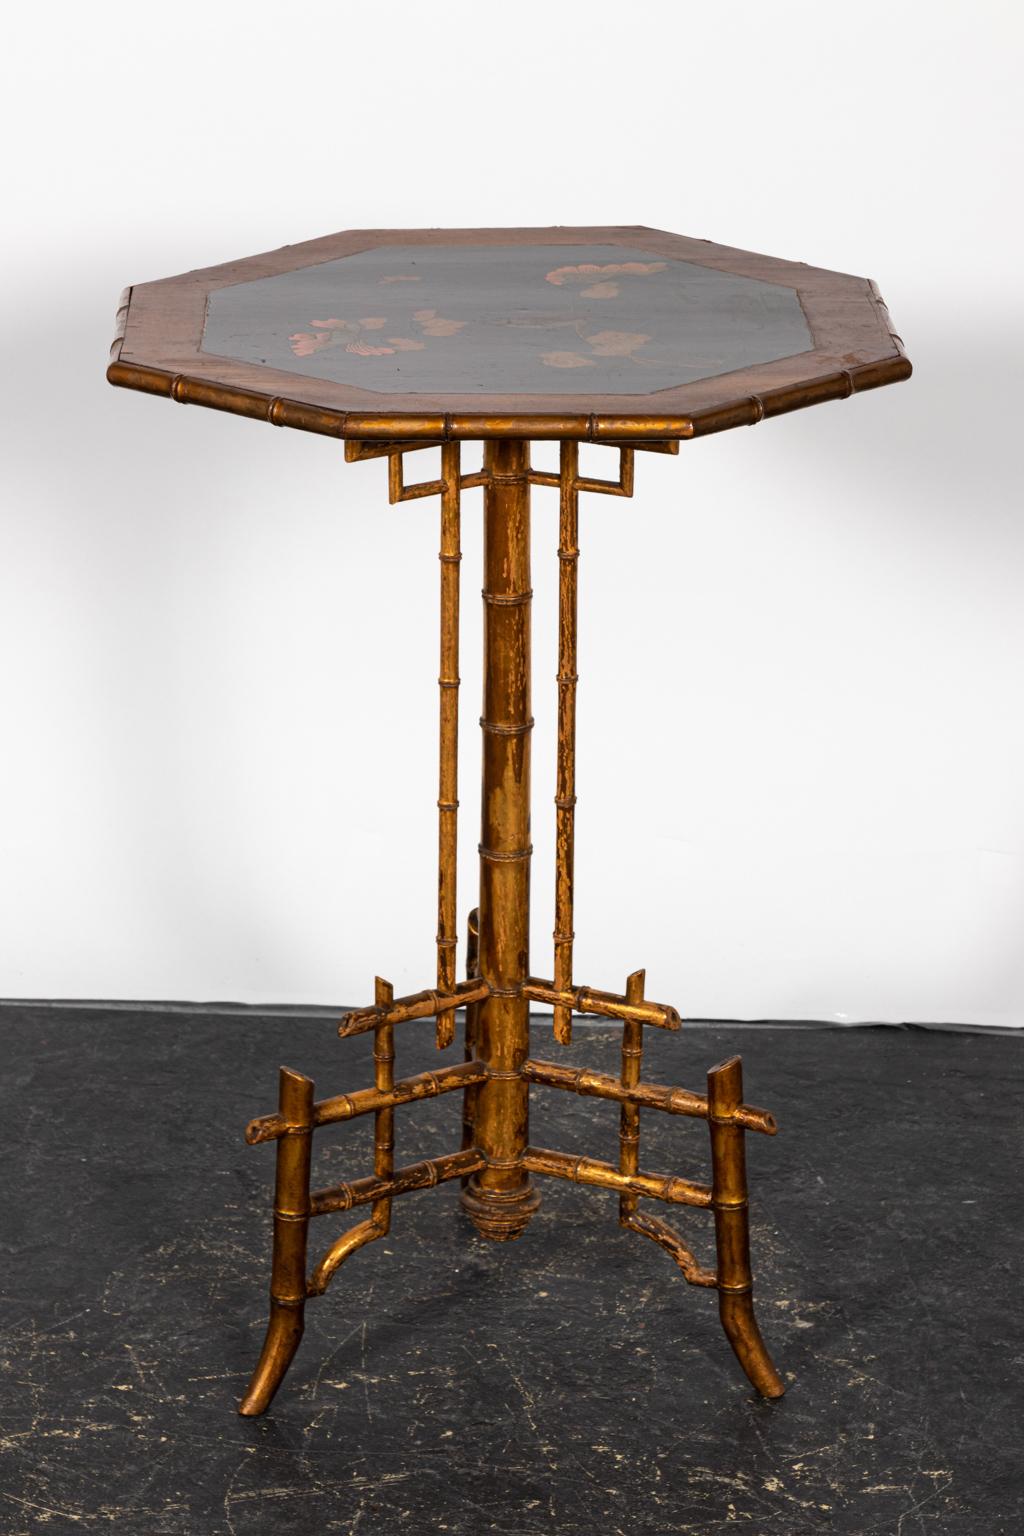 Hexagonal faux bamboo side table with a painted tabletop featuring flowers and butterflies. Please note of wear consistent with age including paint loss, finish loss, and chips as seen on the base and corners of the tabletop.